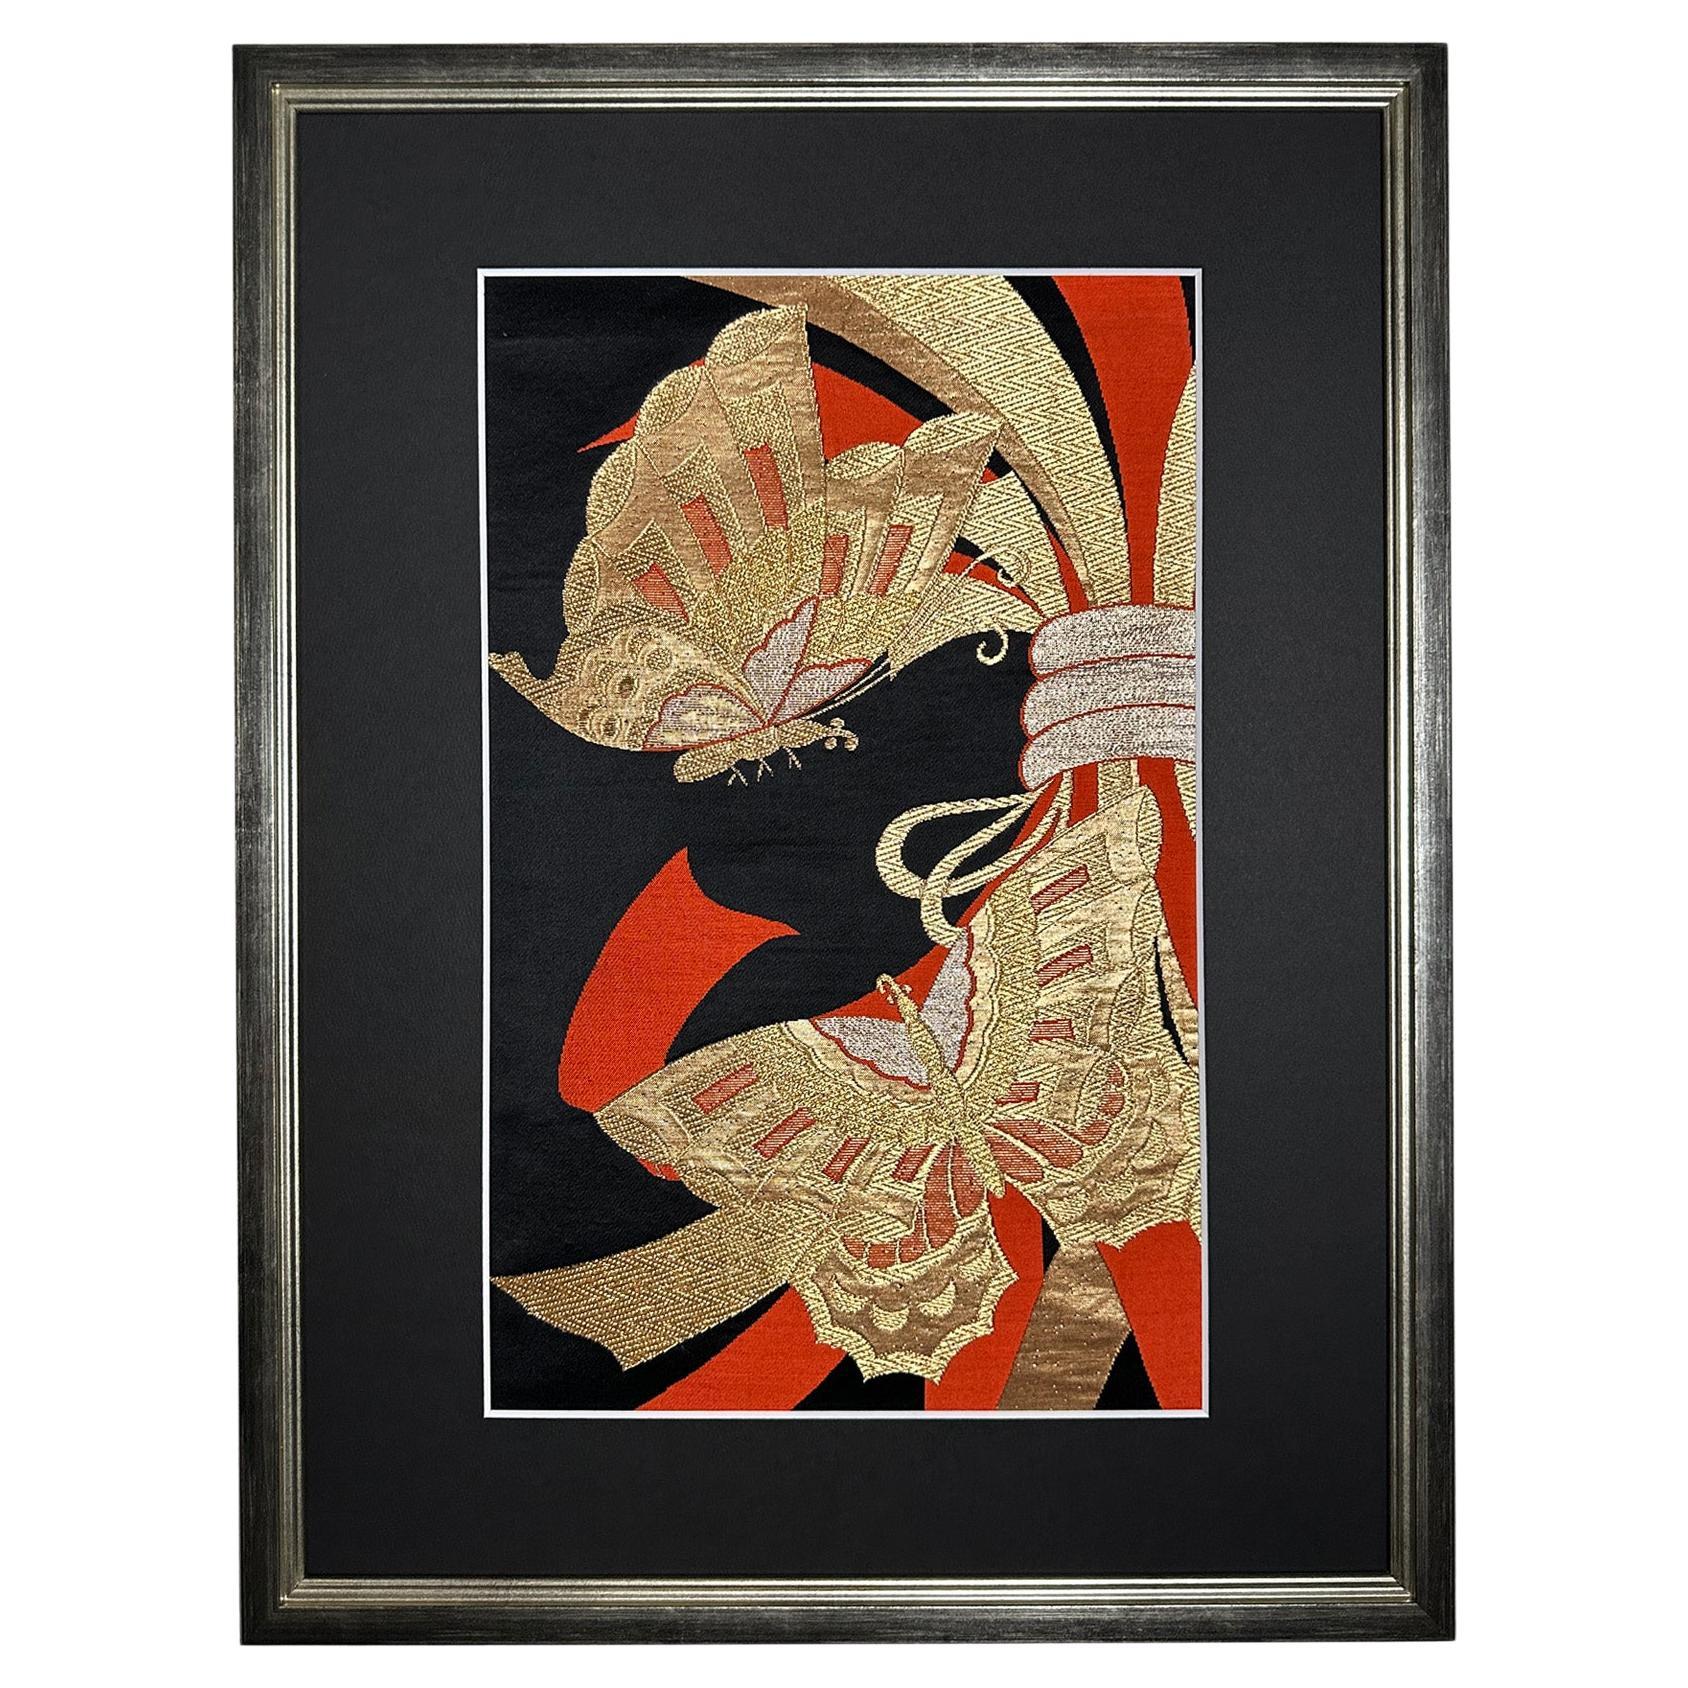 Framed Kimono Art, "Butterfly of Fortune" by Kimono-Couture, Japanese Wall Art For Sale